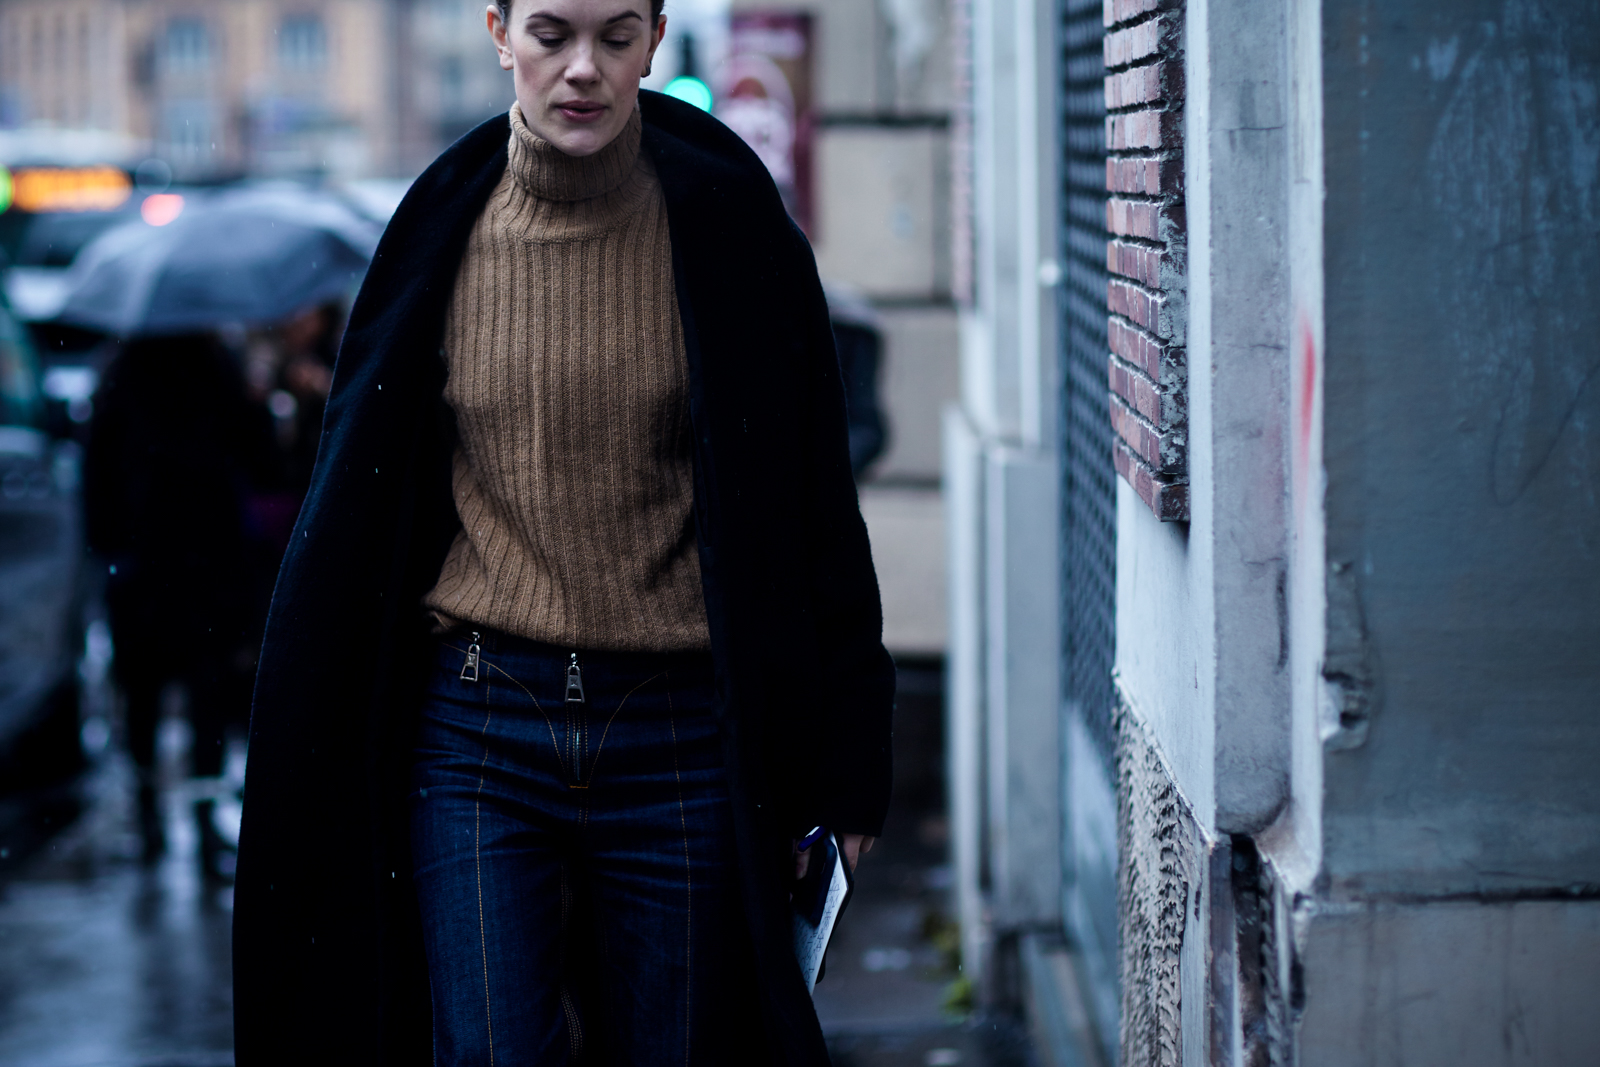 PFW Street Style: Jo Ellison wearing Louis Vuitton jeans, turtleneck sweater and a navy coat before a show at Paris Fashion Week Fall 2016